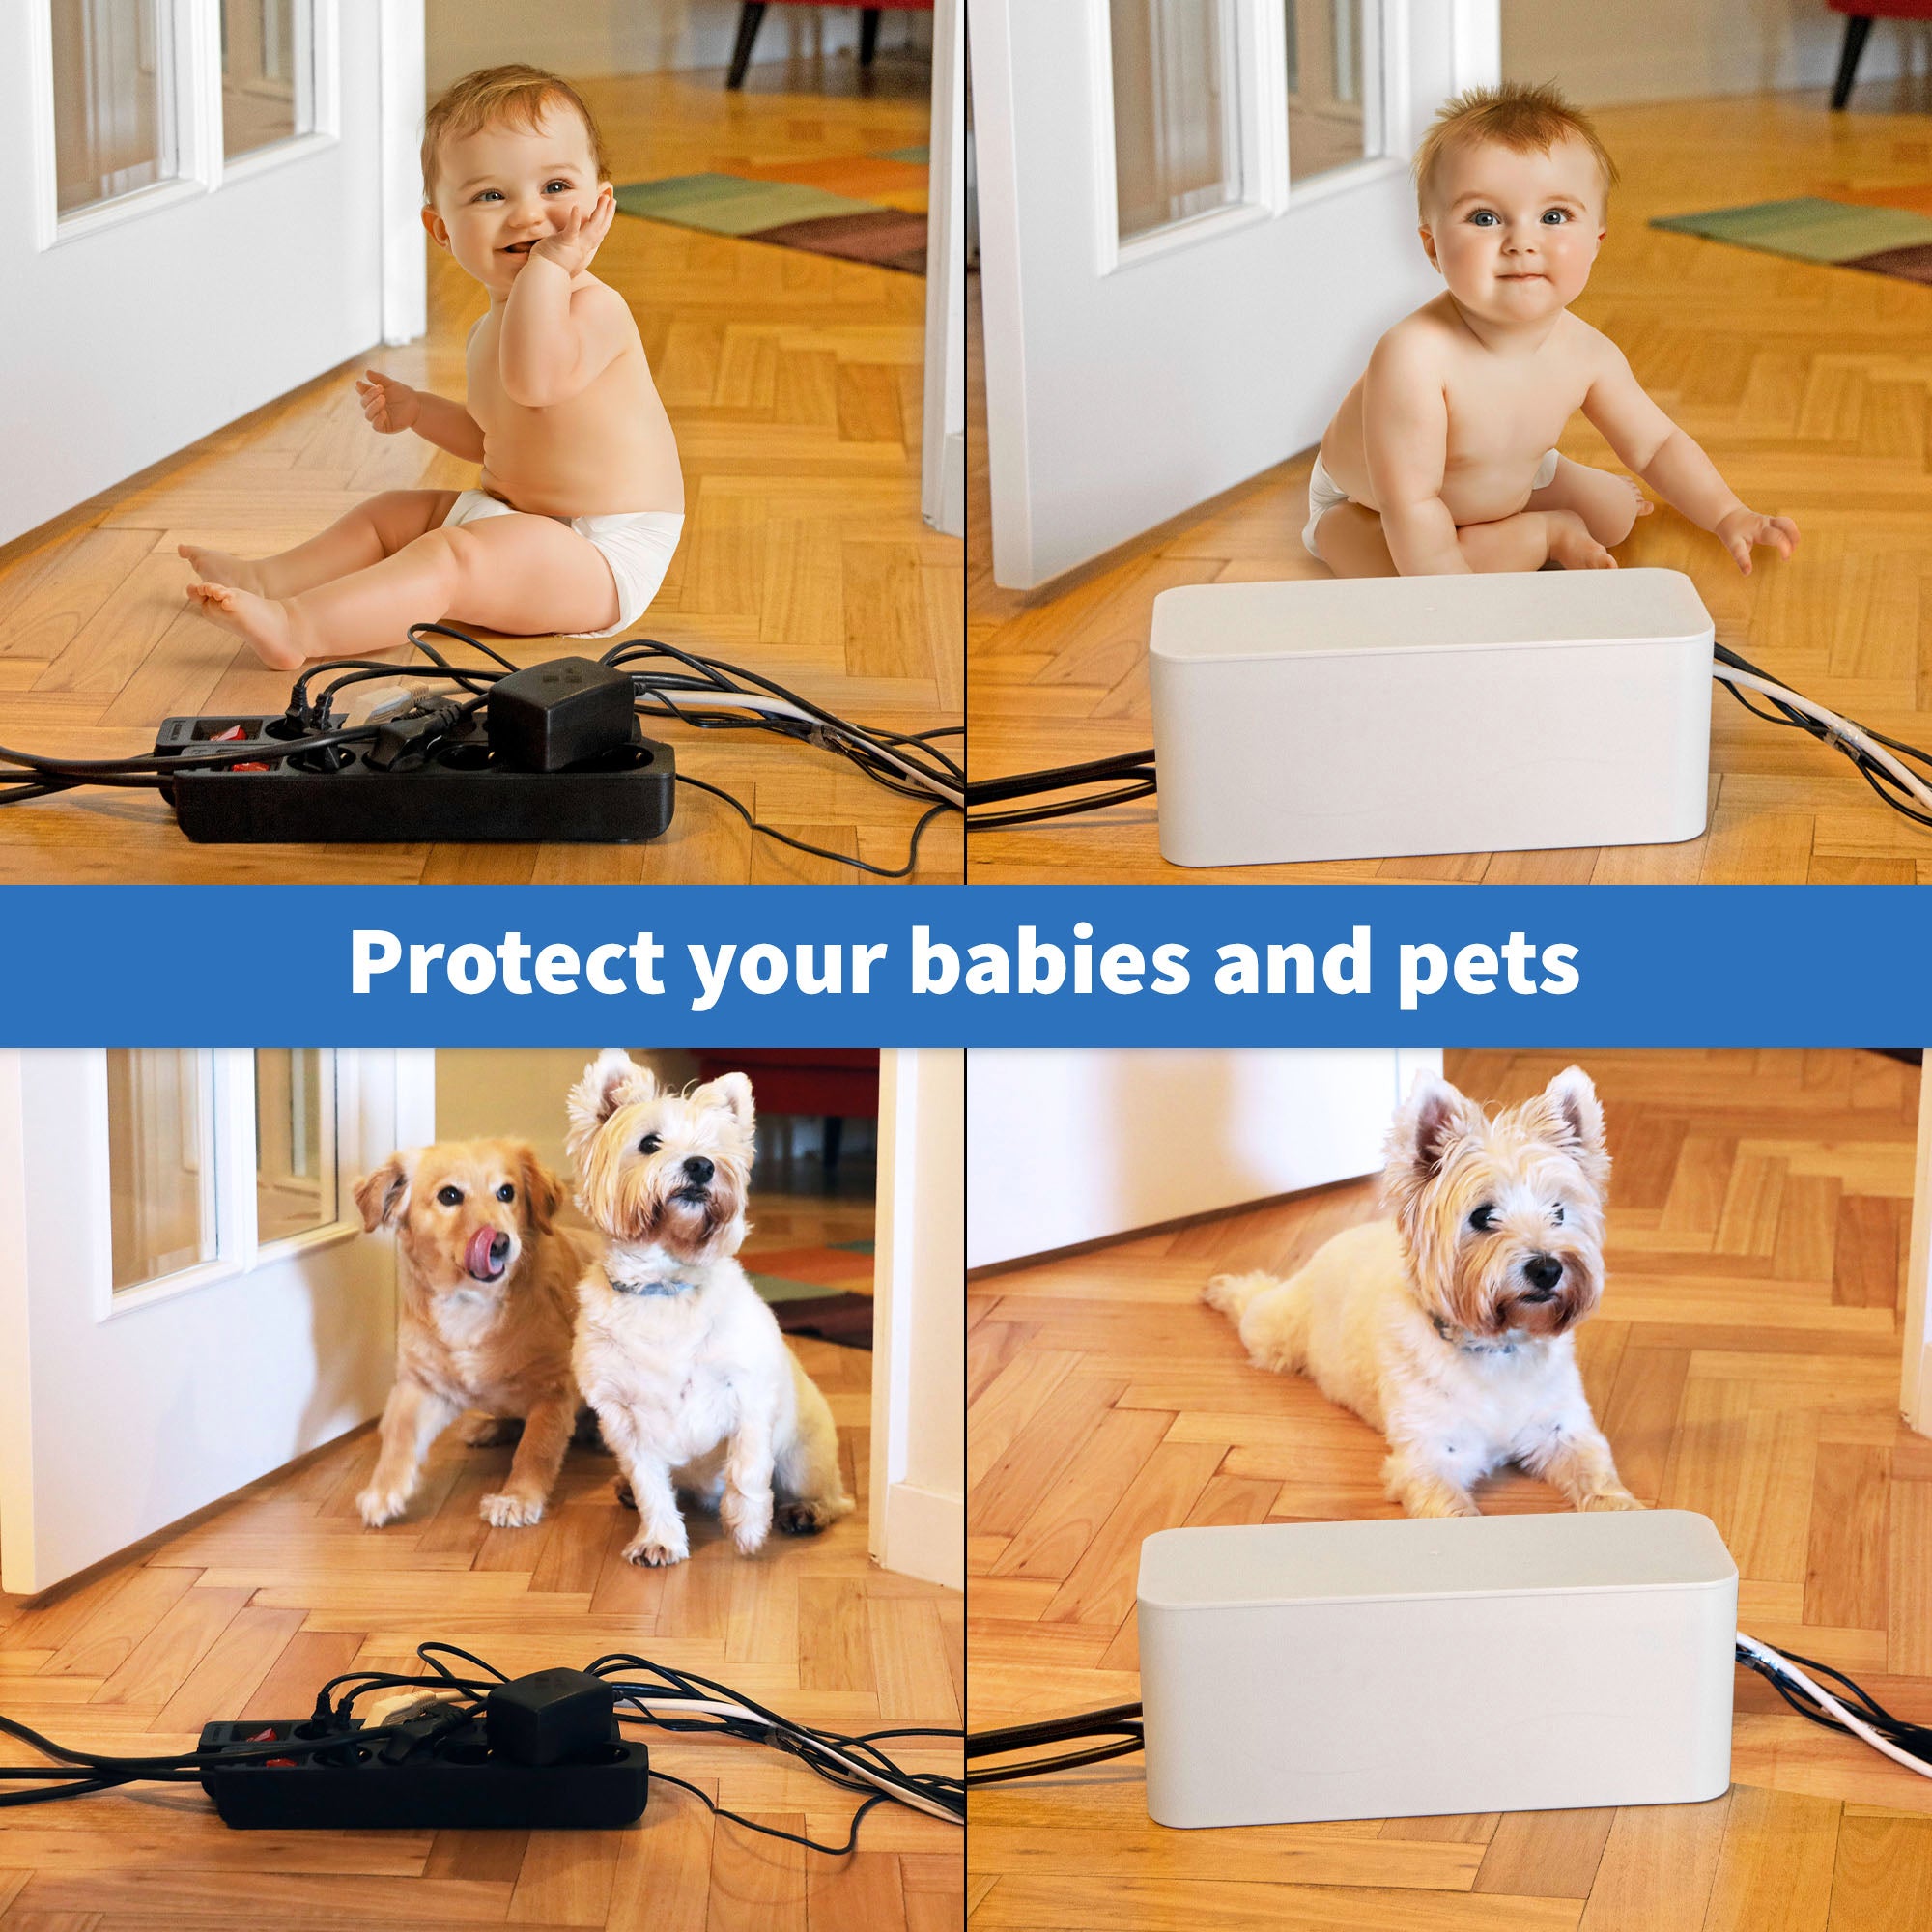 How to Hide TV Cords - Burlap and Babies